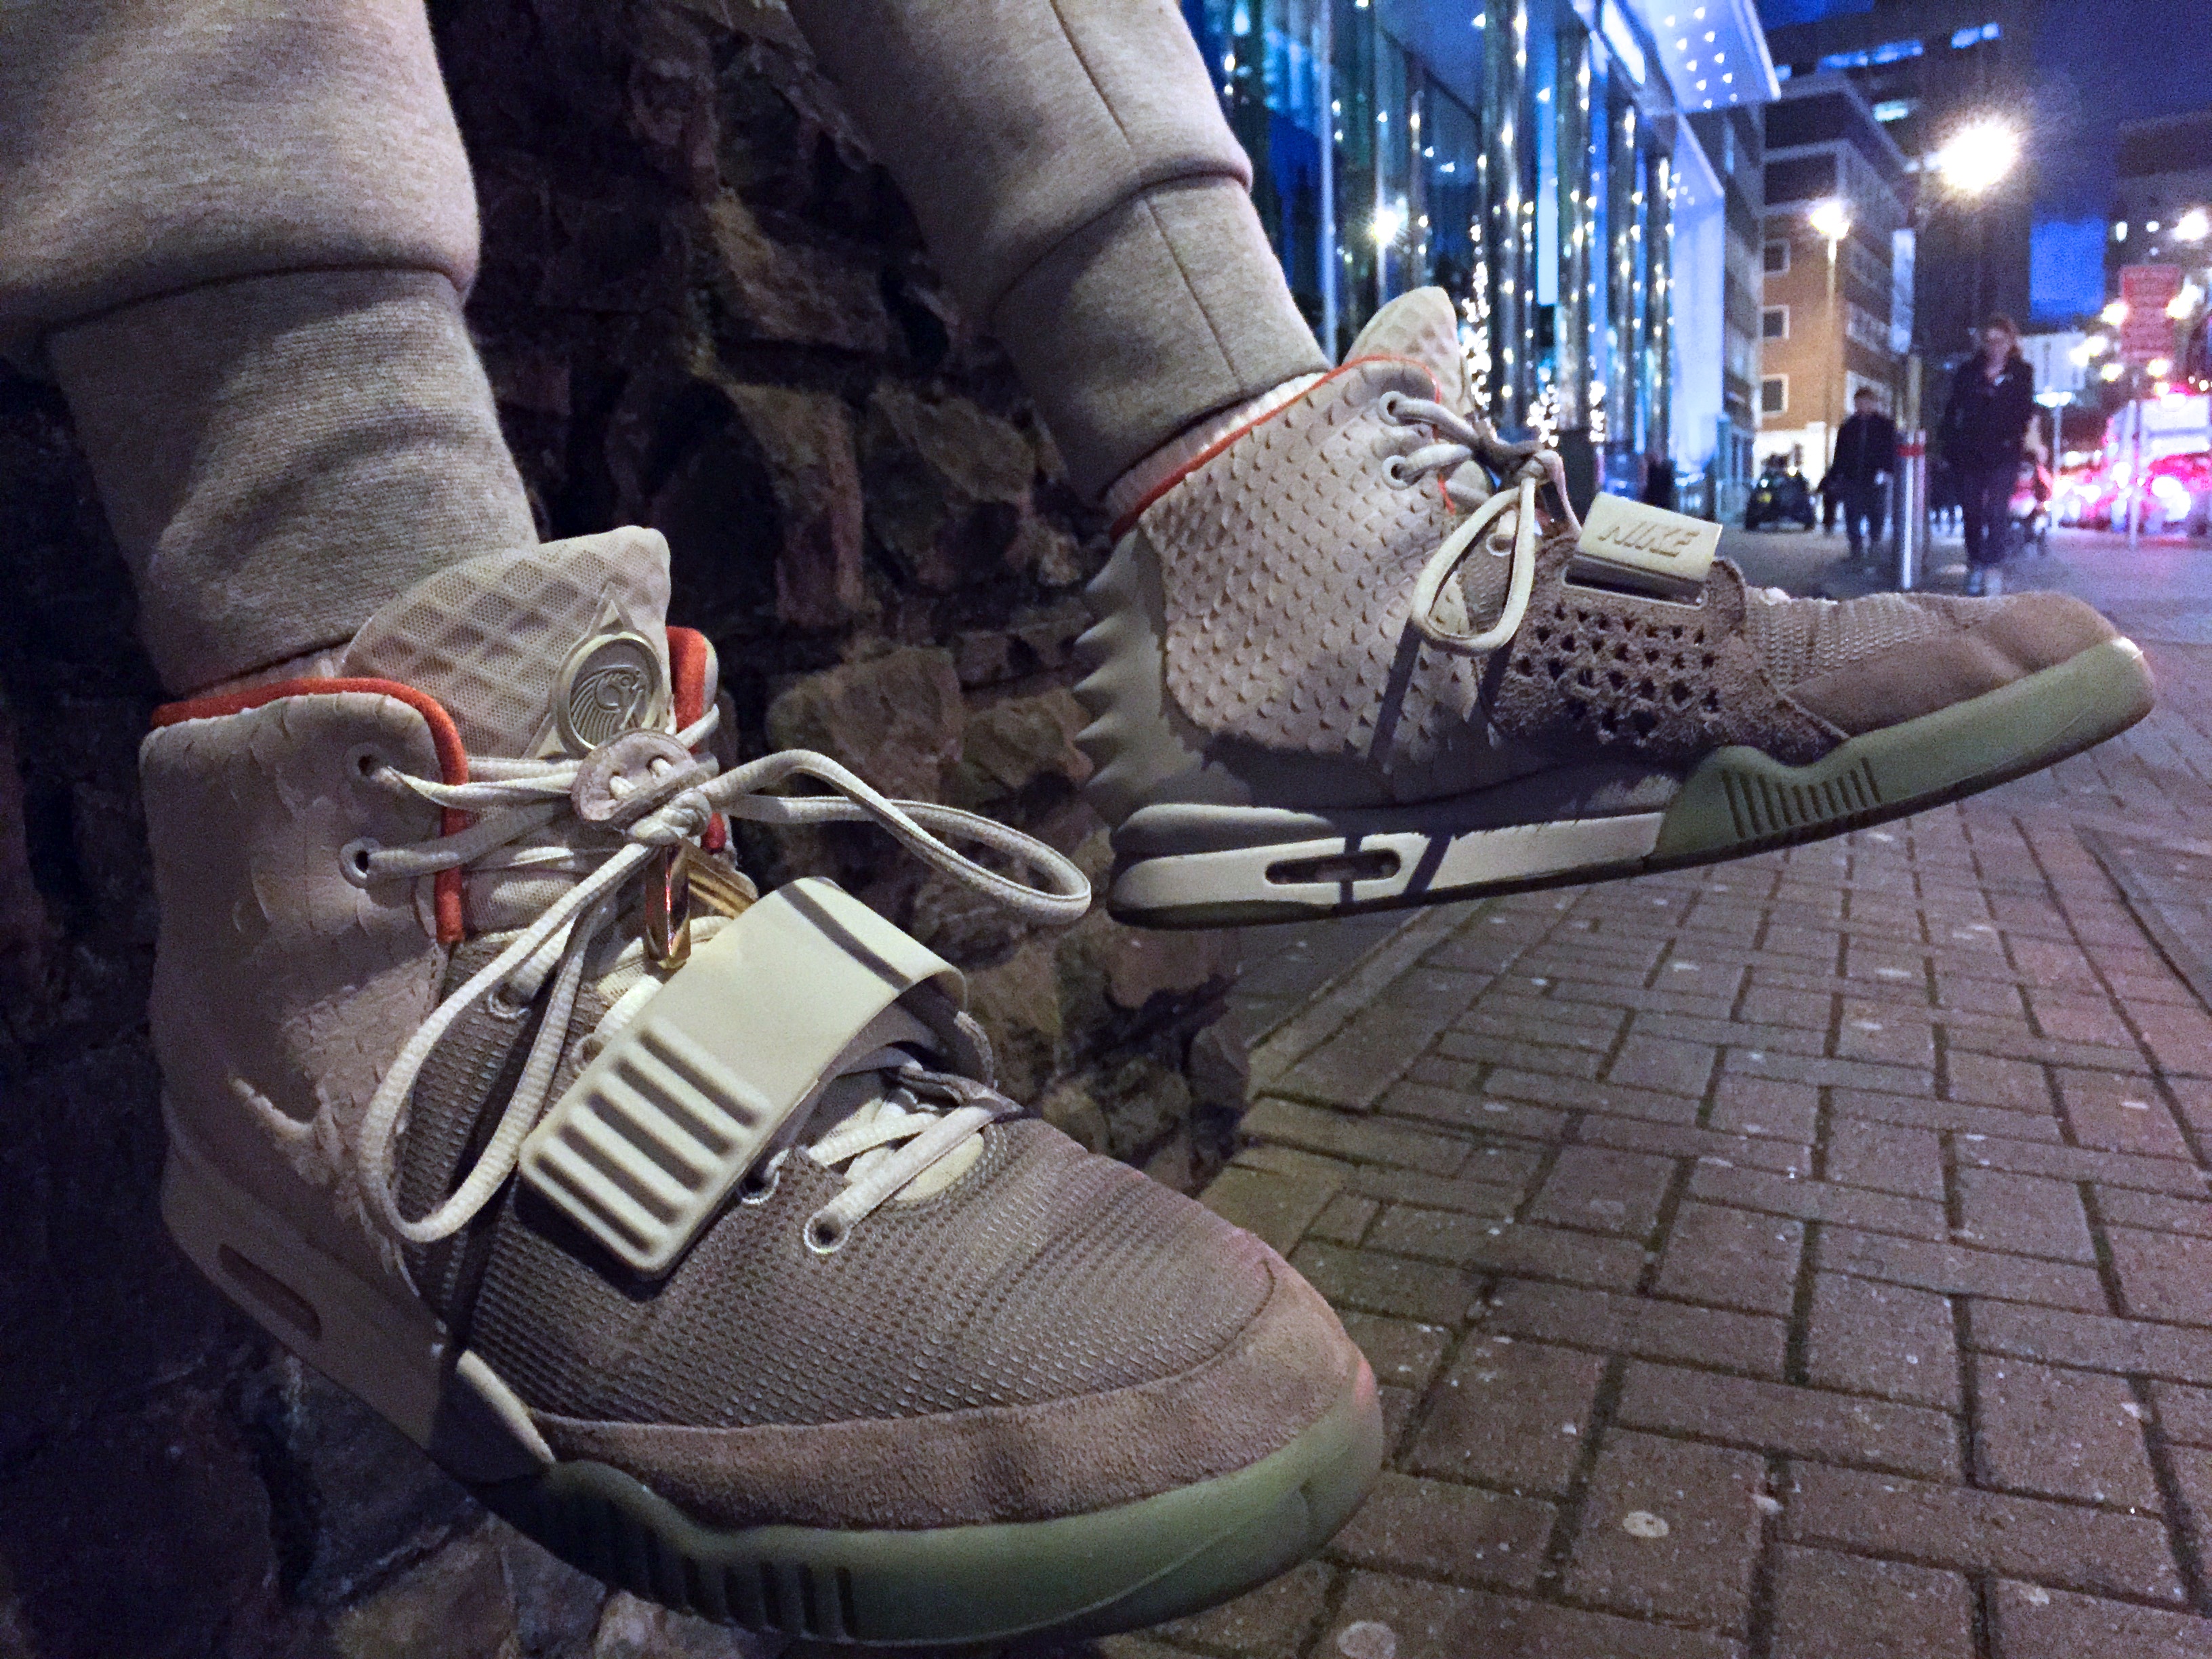 How to lace Nike Air Yeezy 2 